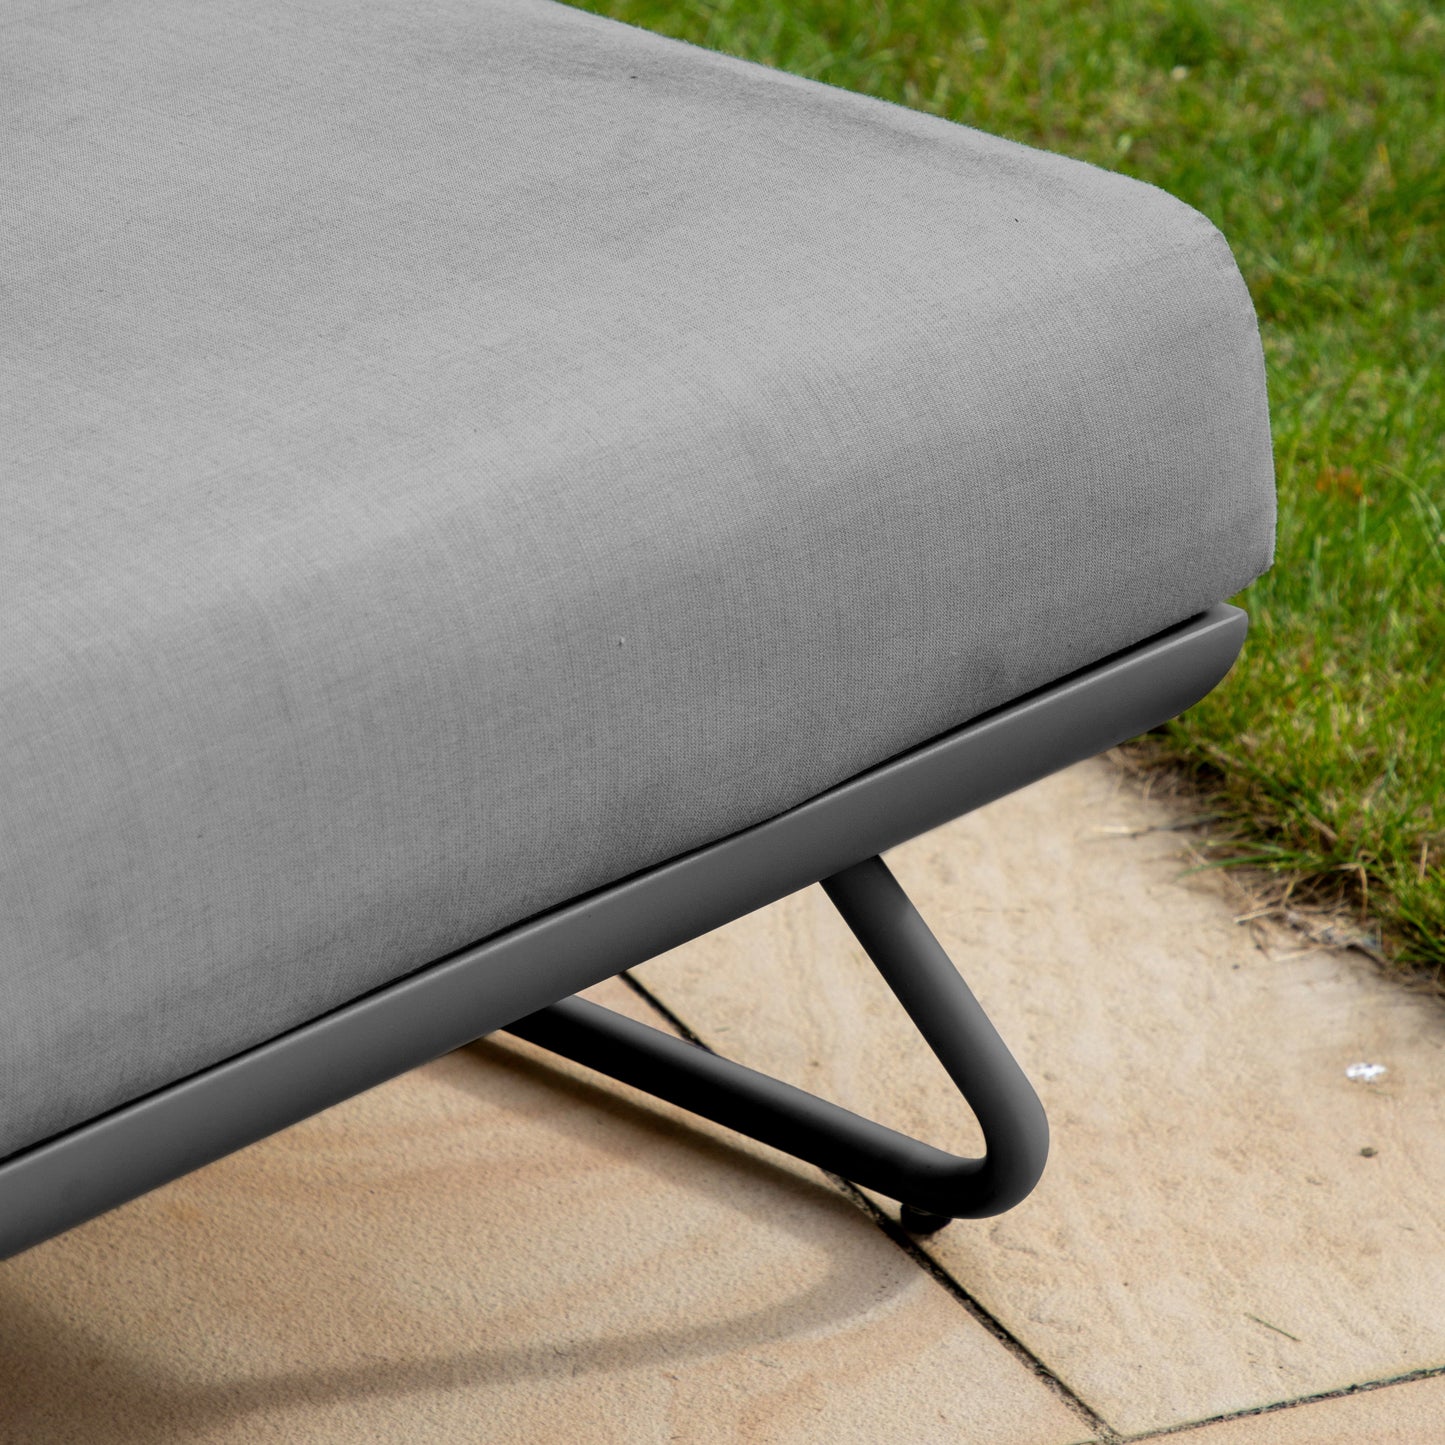 A Home furniture Sun Lounger Slate from Kikiathome.co.uk on top of a metal frame.